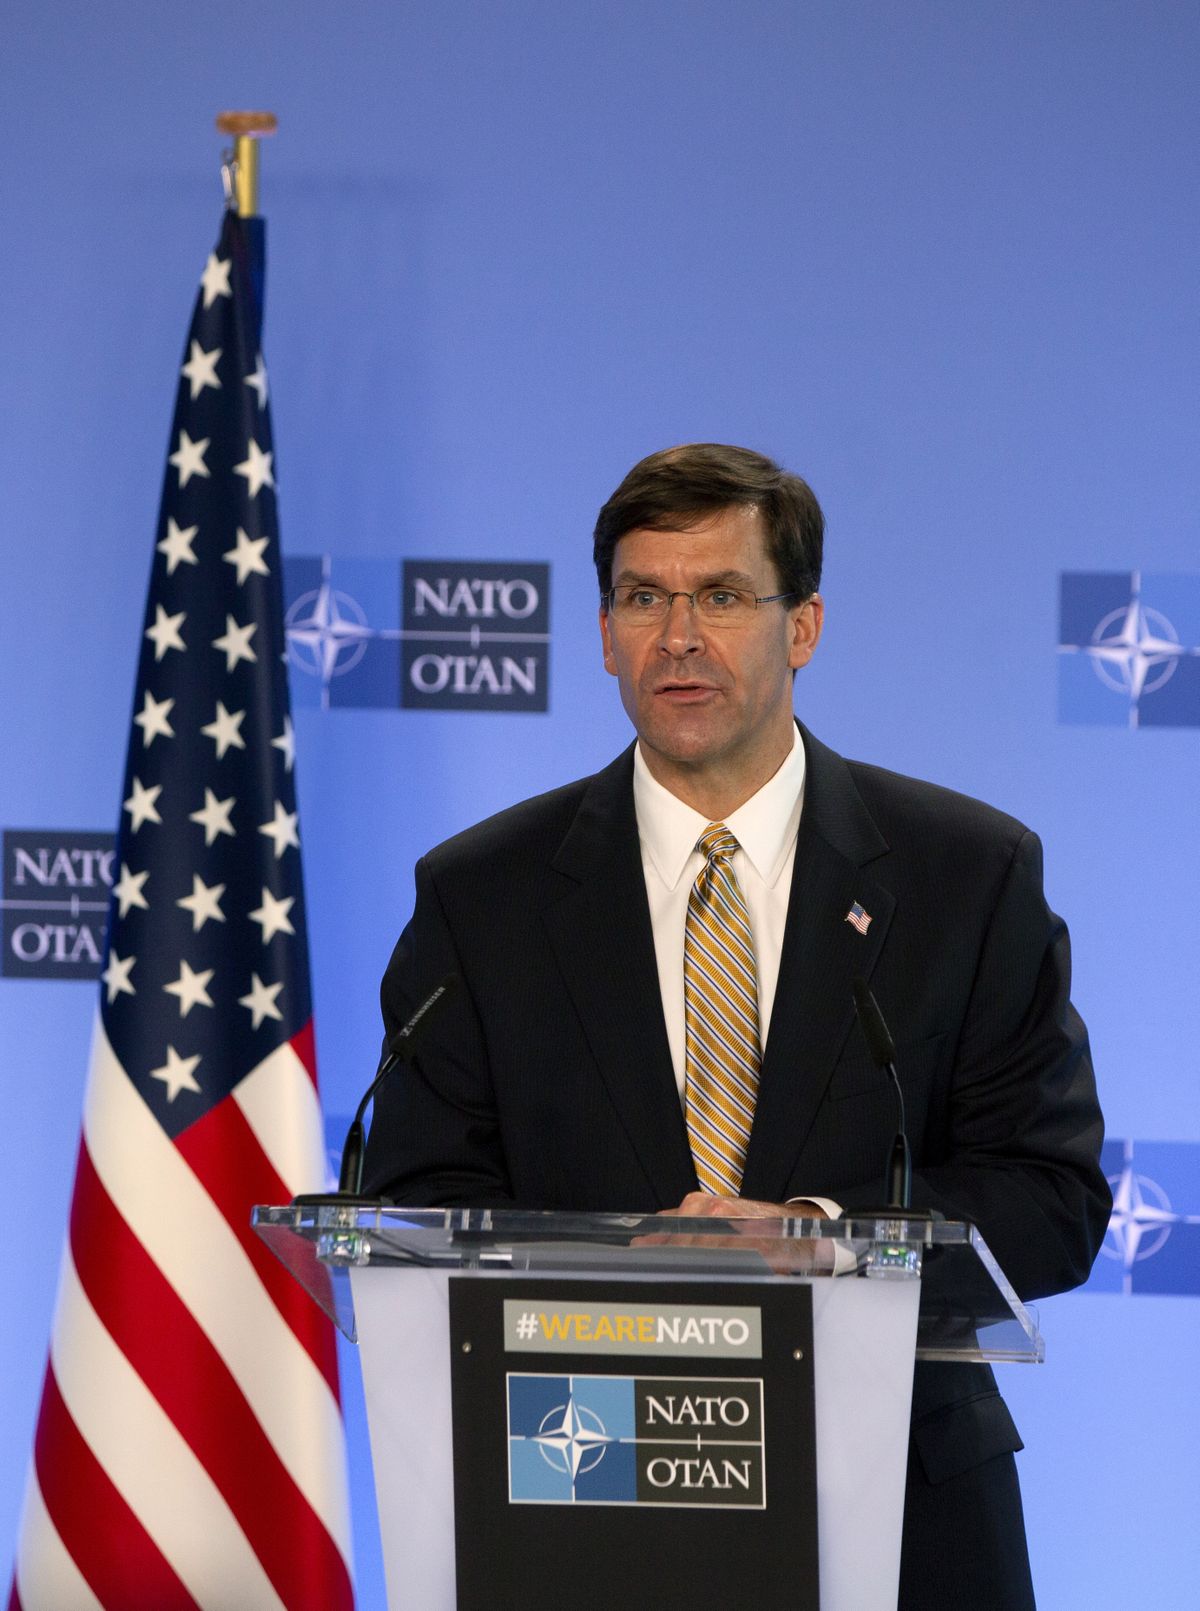 Pentagon chief seeks to reassure NATO over US troop plans   The ...